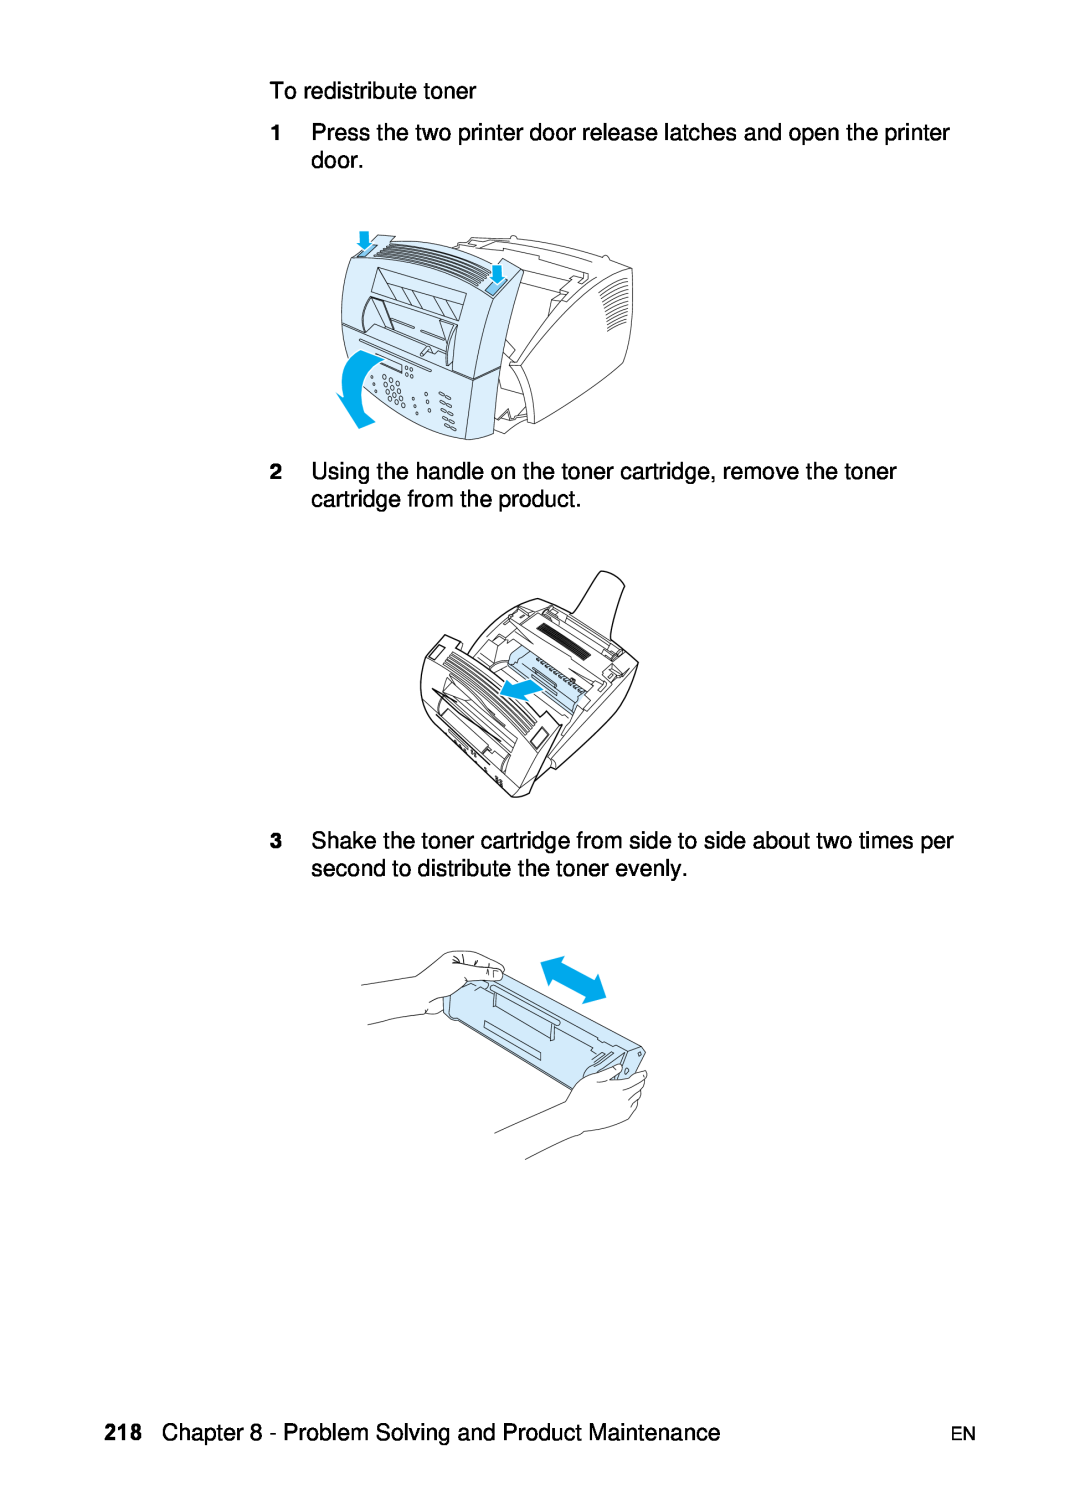 HP 3200 manual To redistribute toner, Problem Solving and Product Maintenance 